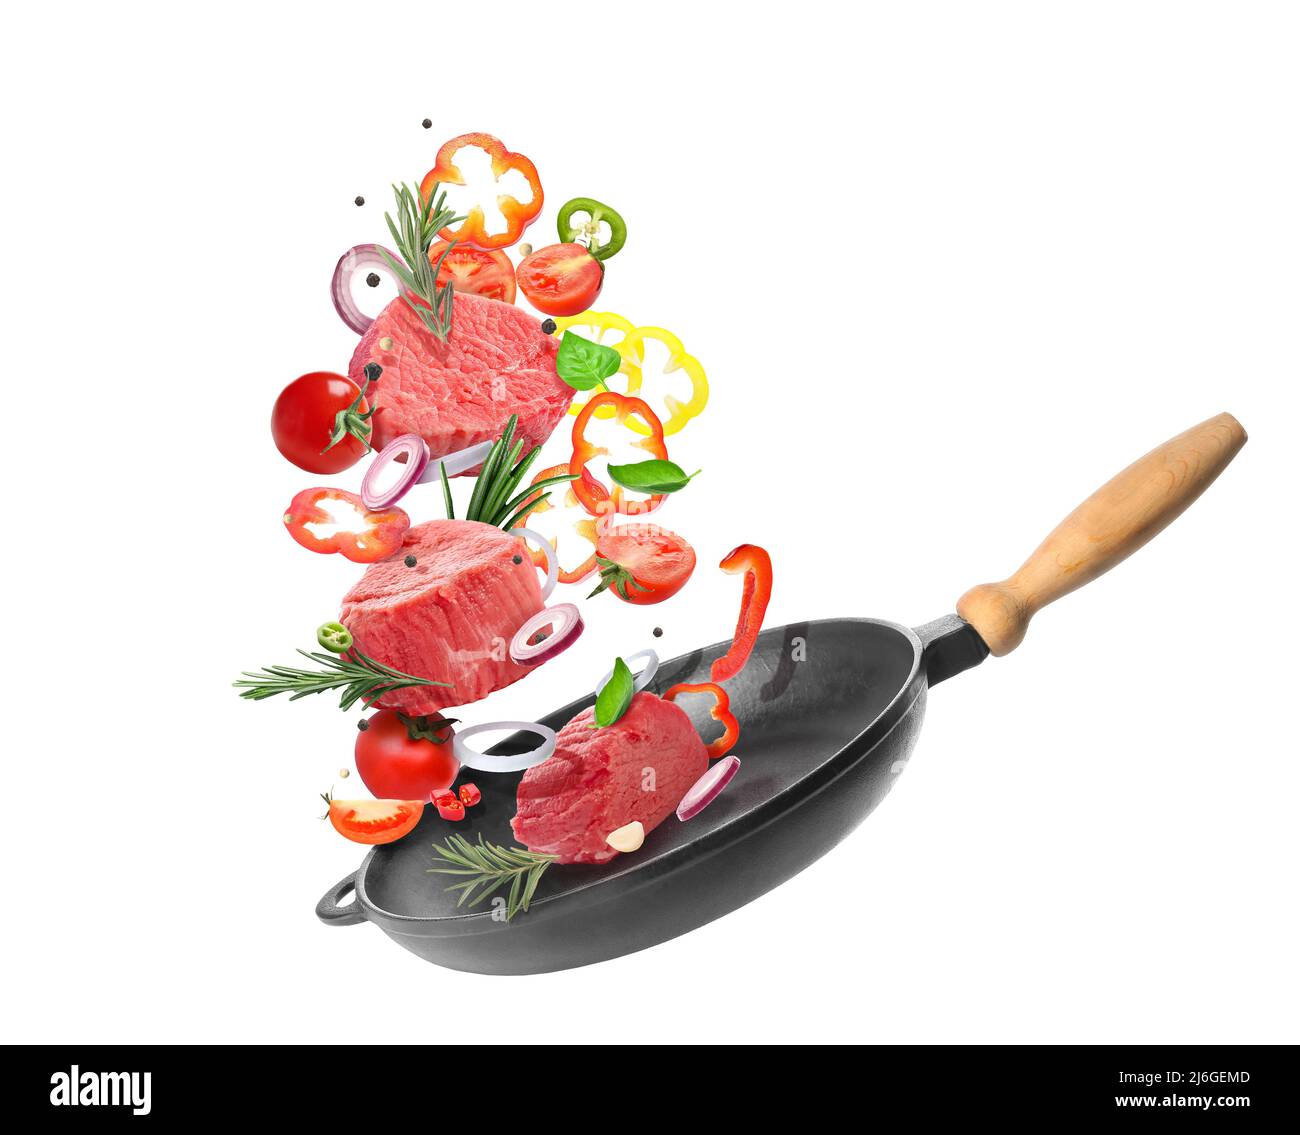 https://c8.alamy.com/comp/2J6GEMD/flying-frying-pan-with-raw-meat-vegetables-and-spices-on-white-background-2J6GEMD.jpg